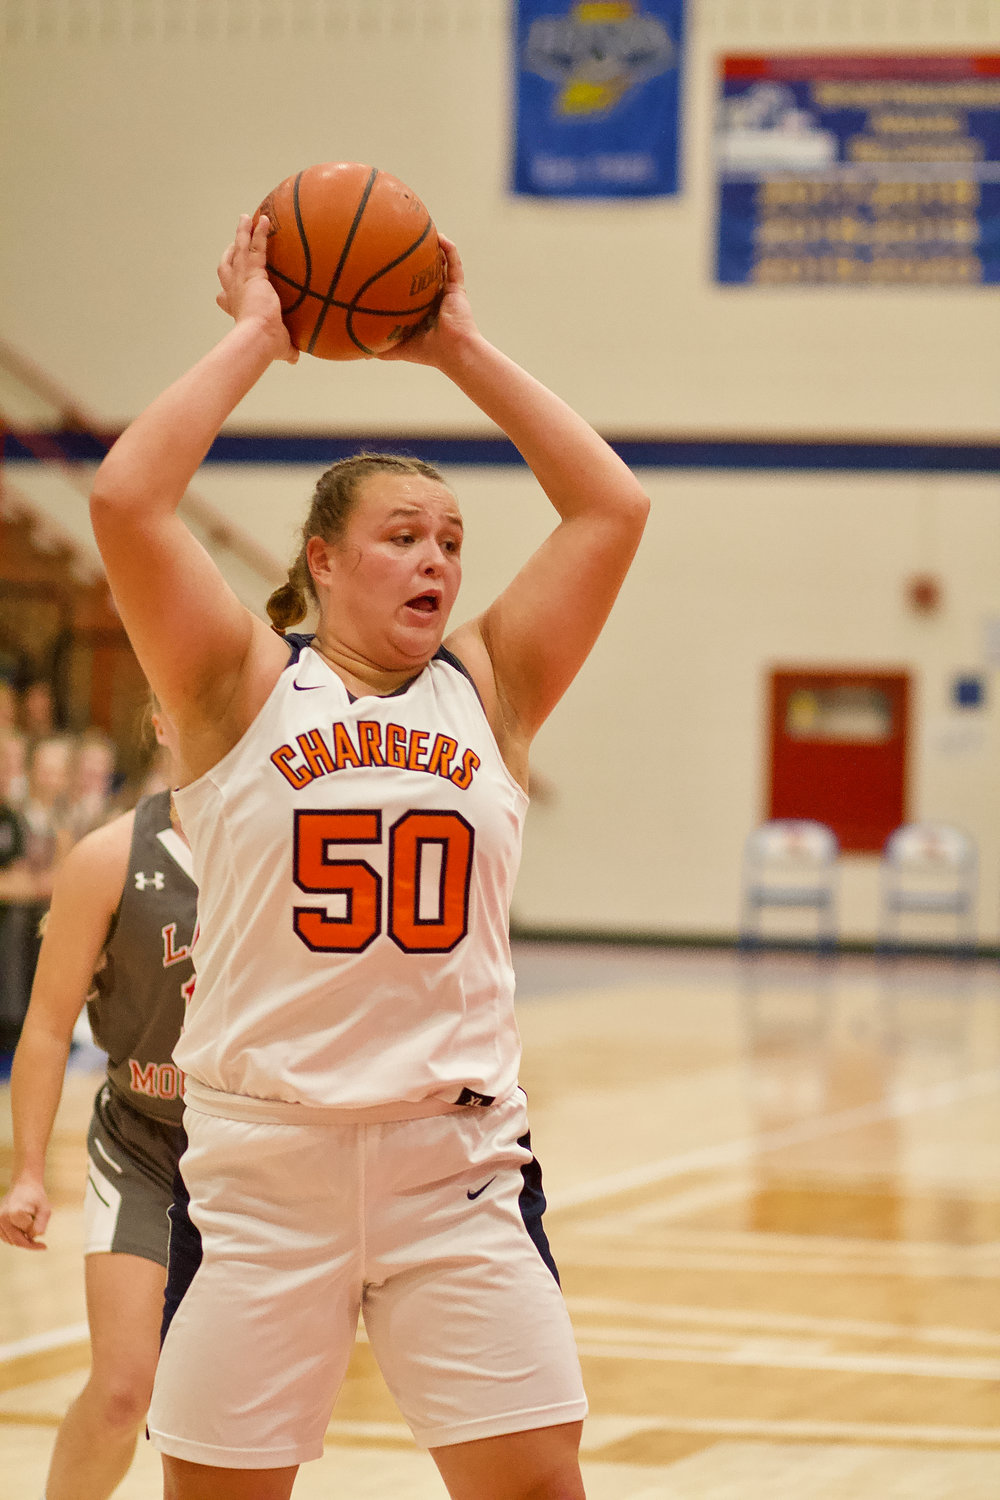 Piper Ramey tallied 11 rebounds to lead the Chargers.